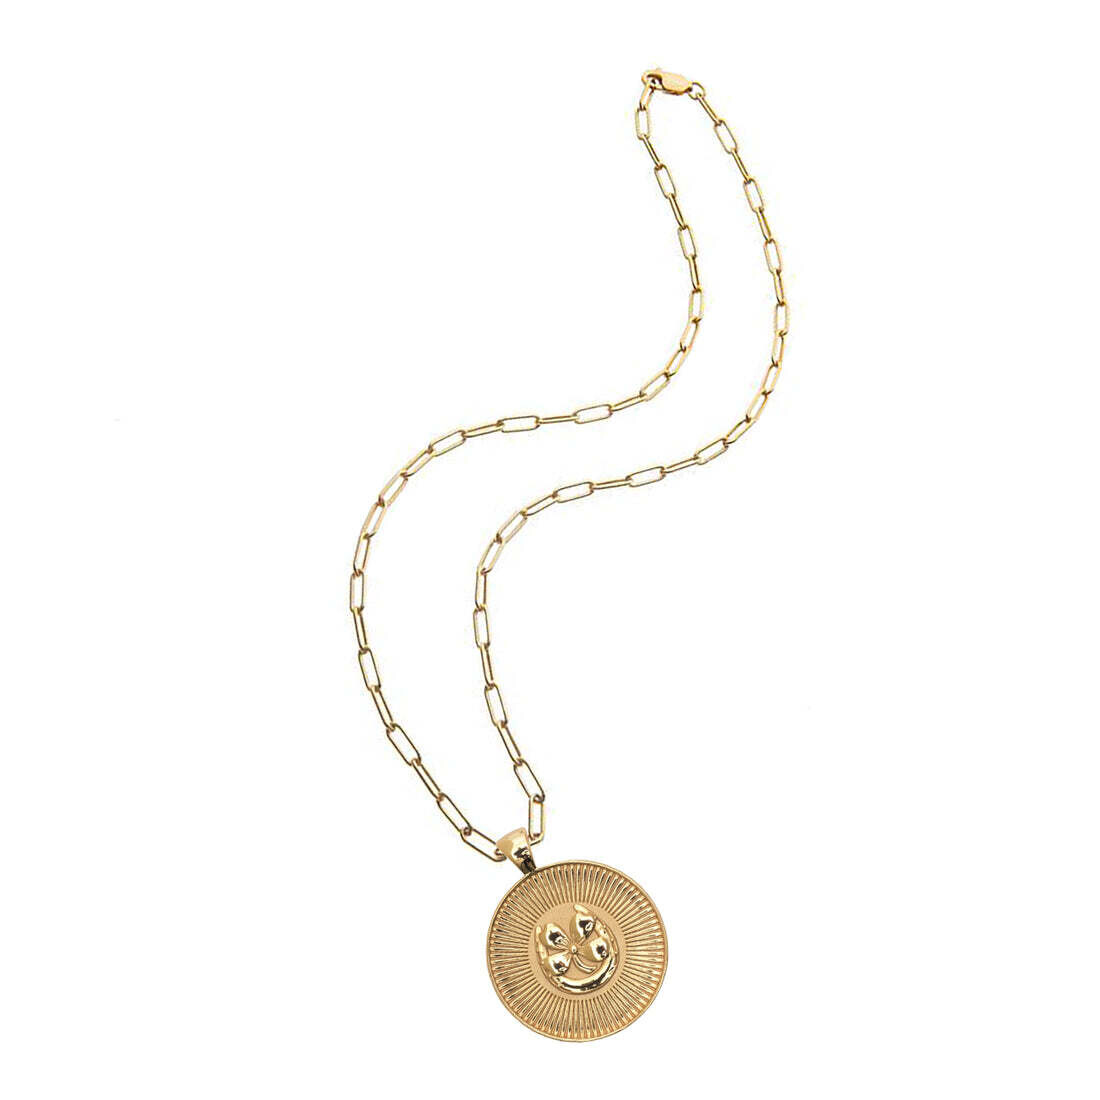 Jane Win Original LUCKY Coin Pendant with Drawn Link Chain